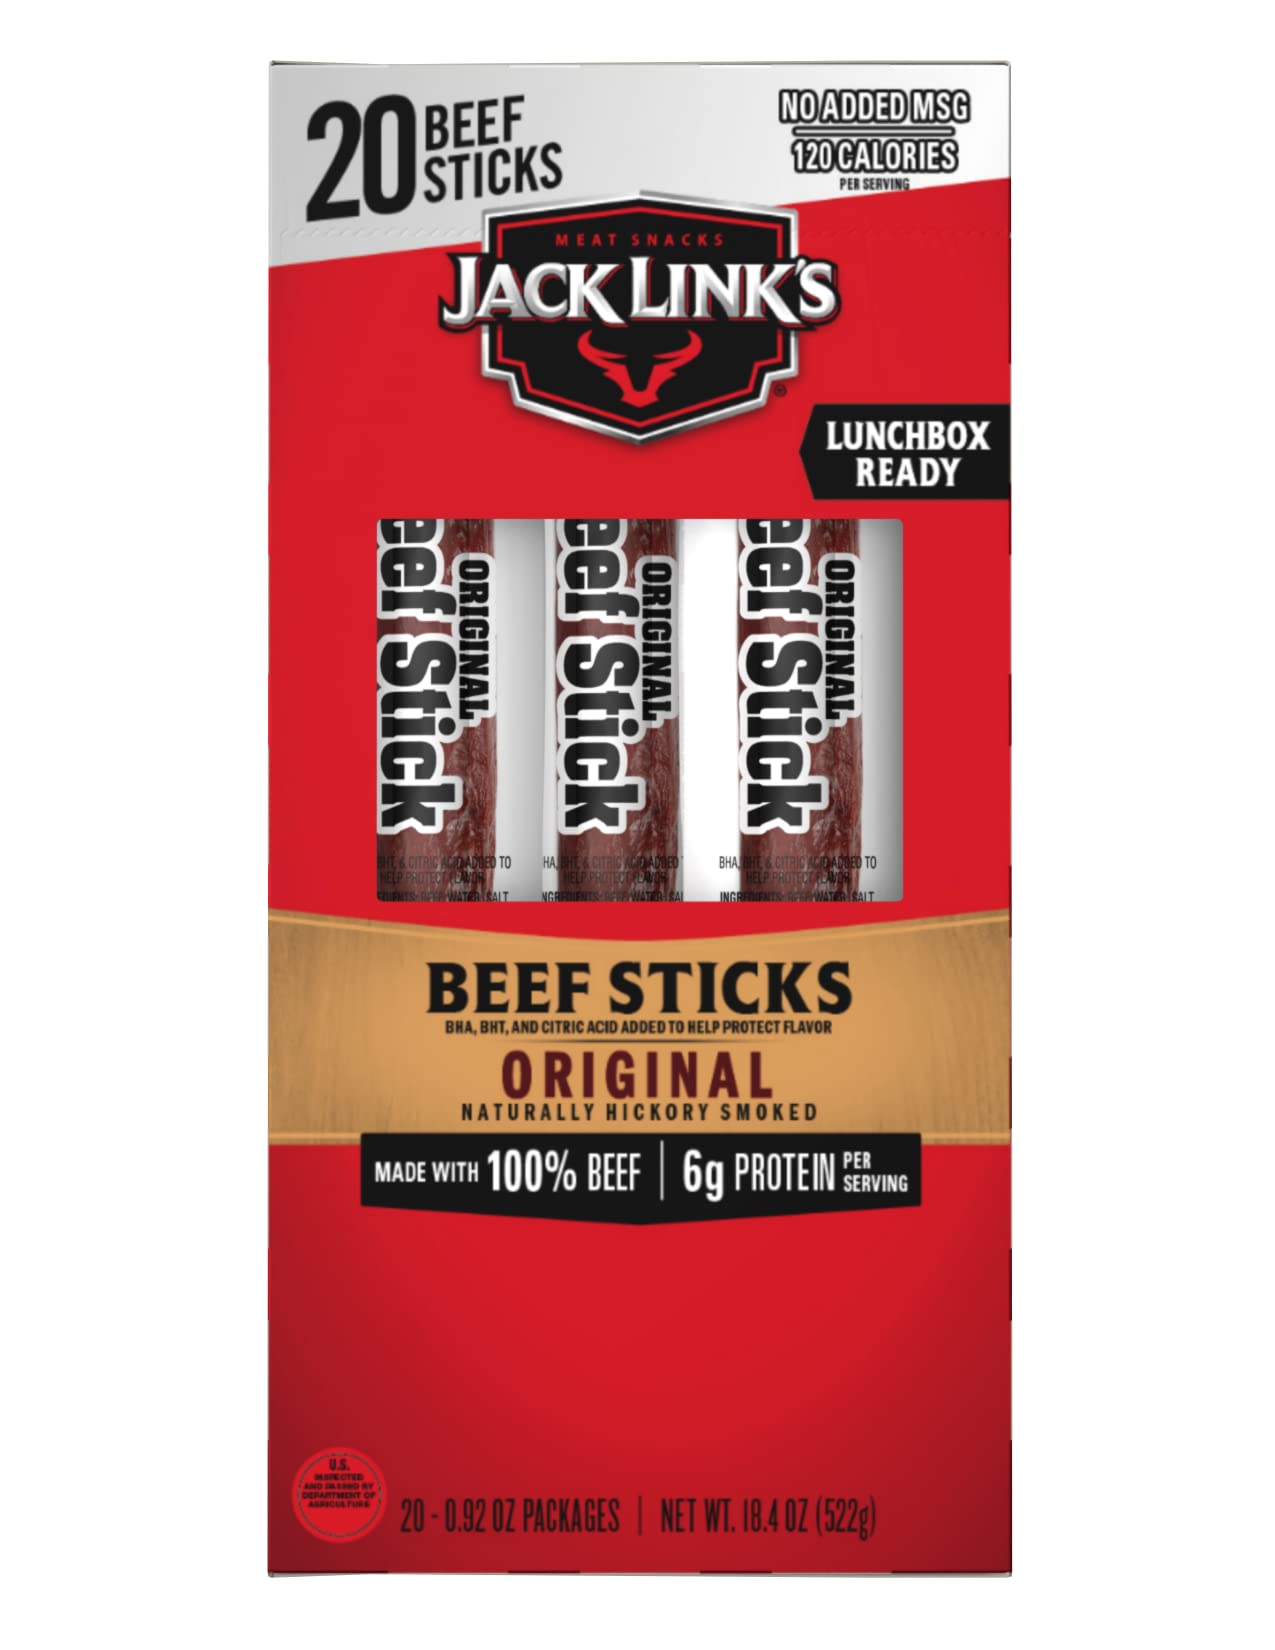 20-Count 0.92-Oz. Jack Link's Protein Snack Beef Sticks (Original) $7.51 w/ S&S + Free Shipping w/ Prime or on $35+